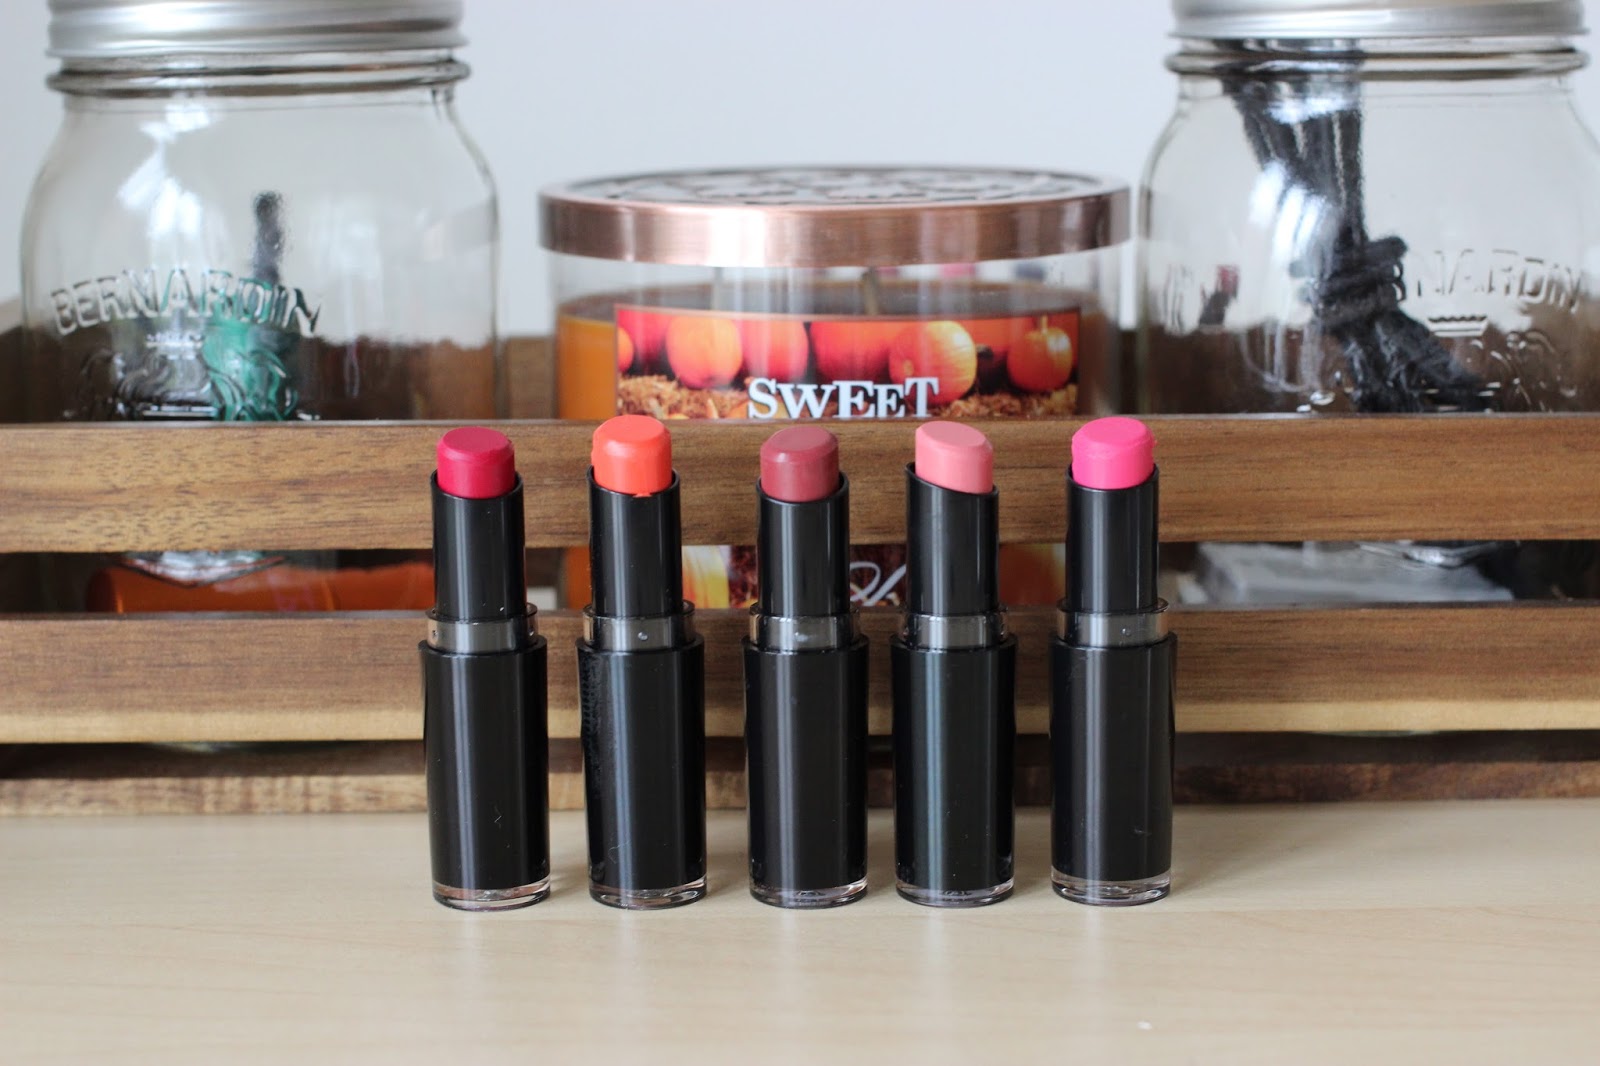 Wet n Wild Megalast Lipstick Swatches Cherry Picking, 24 Carrot God, Spiked with Rum, Think Pink, Don't Blink Pink